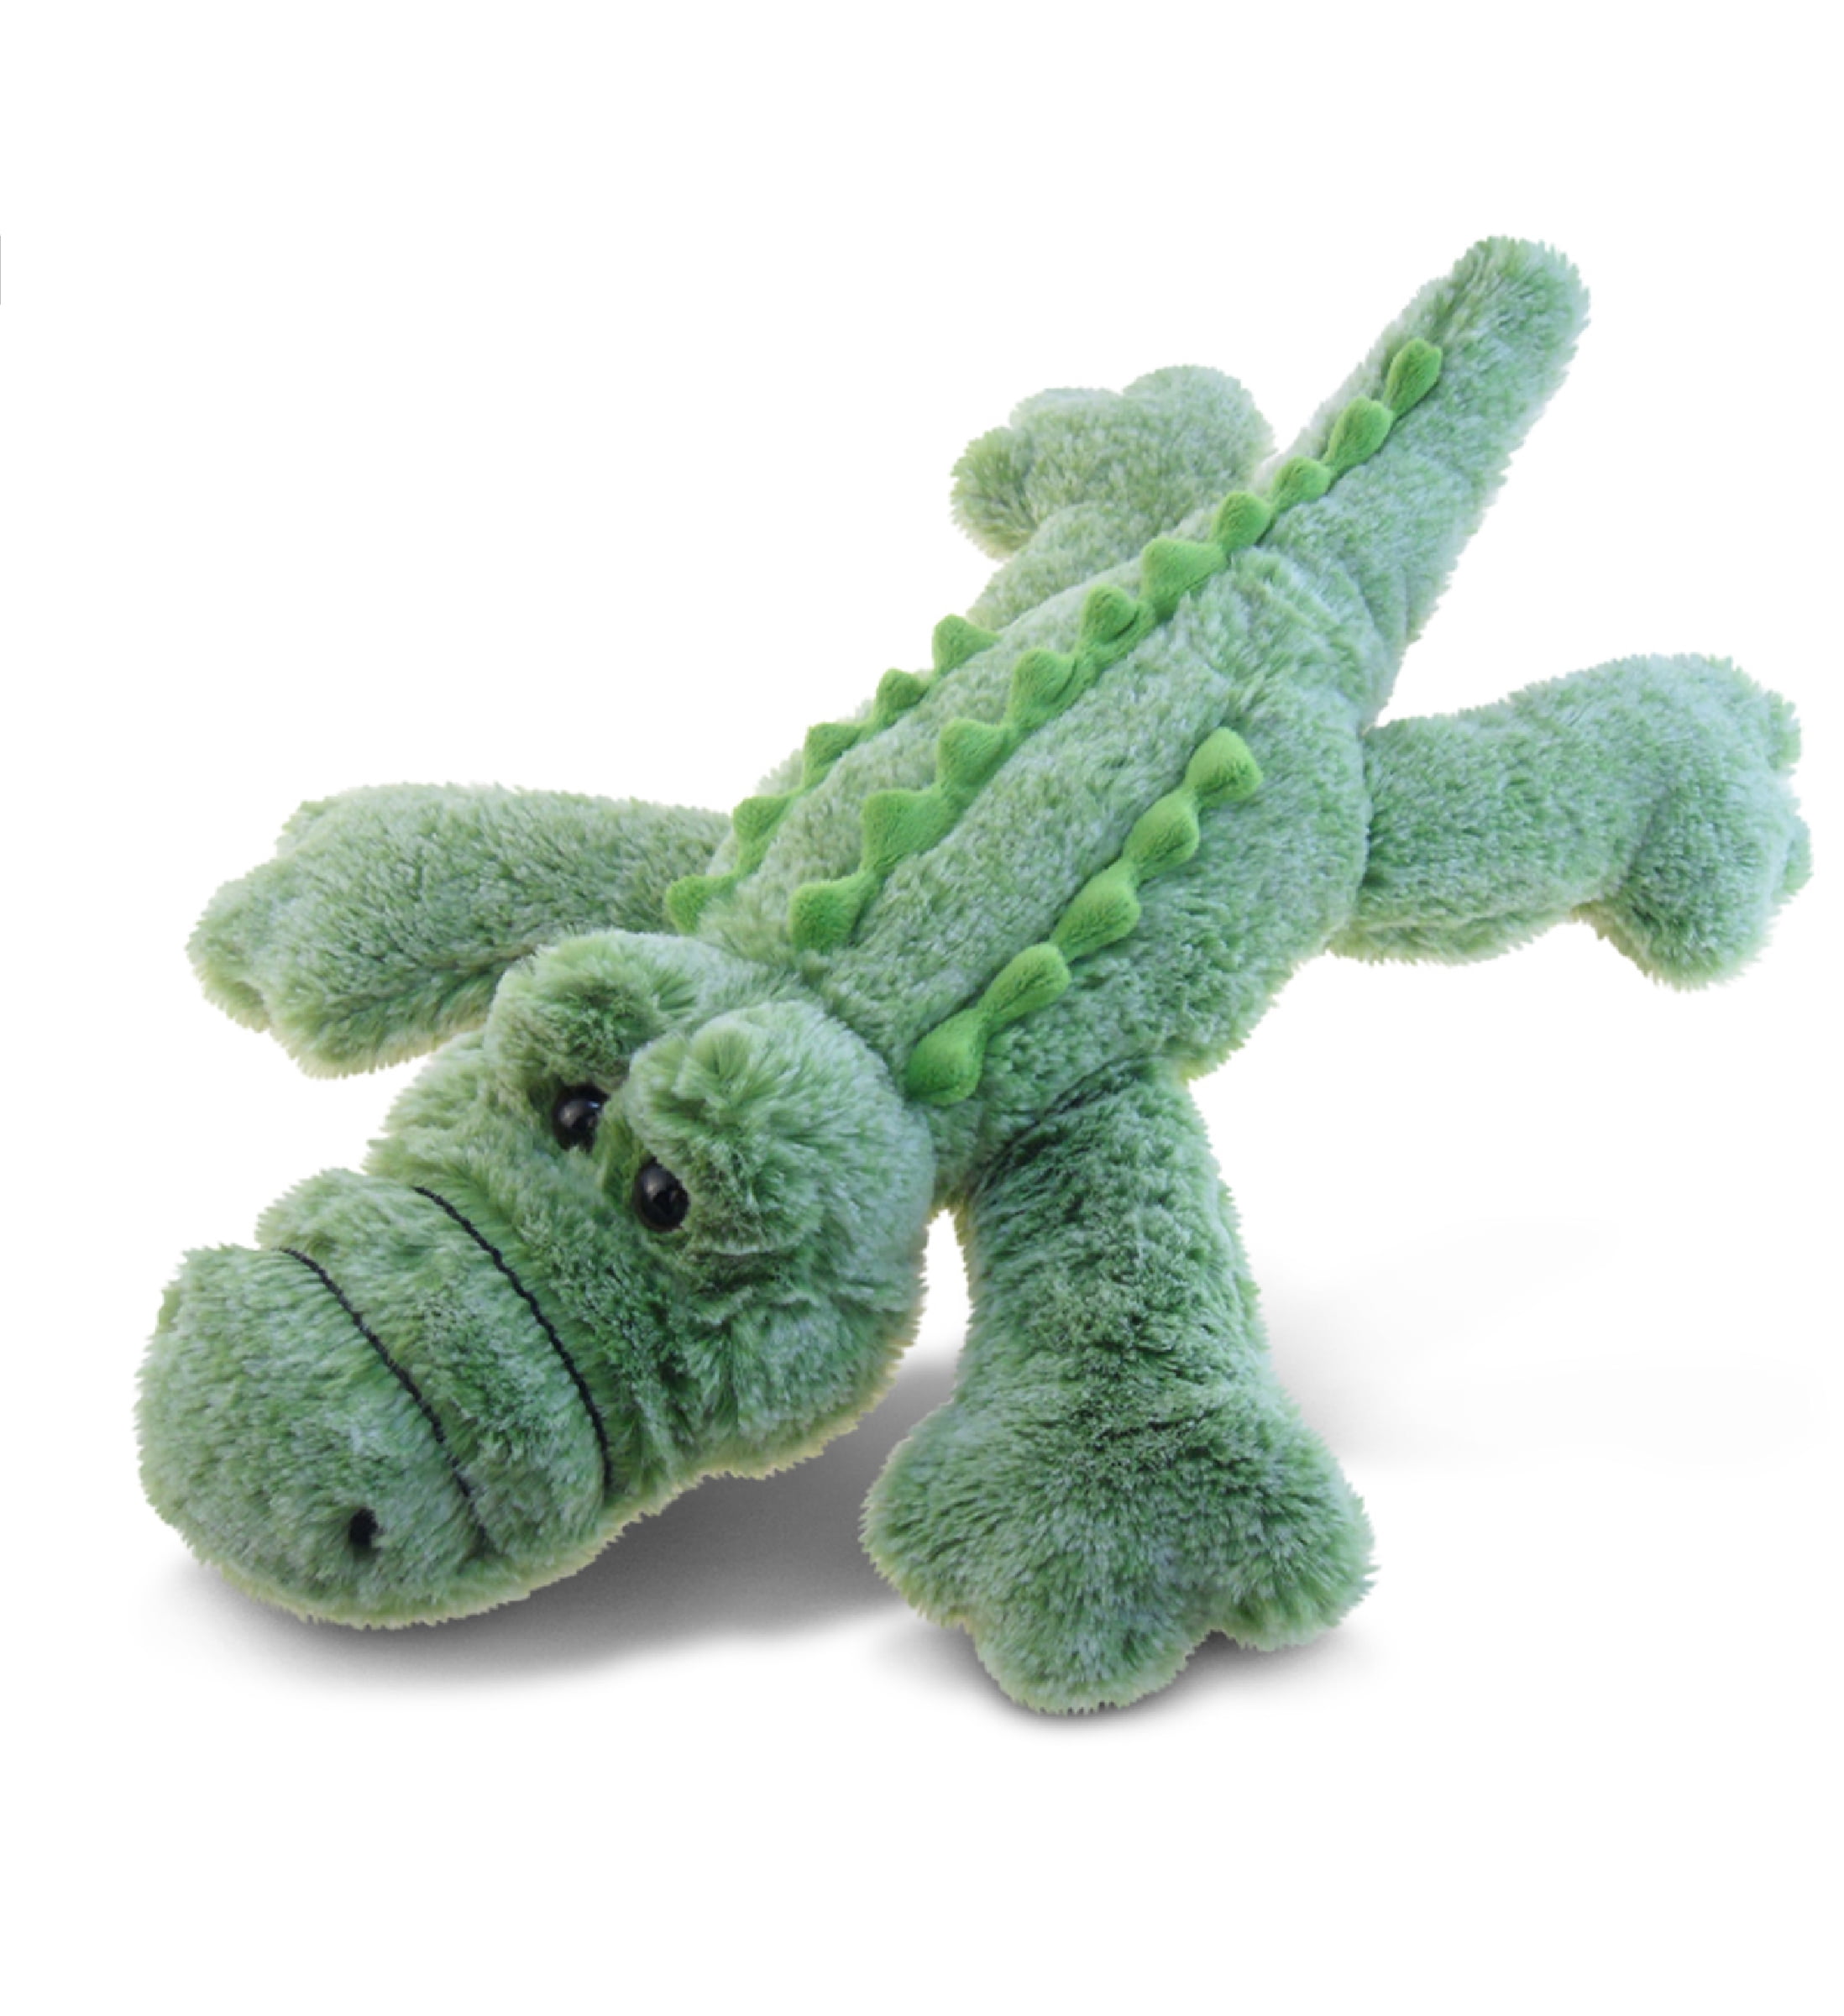 Birth of Life Alligator with Baby Plush Toy 19 Long